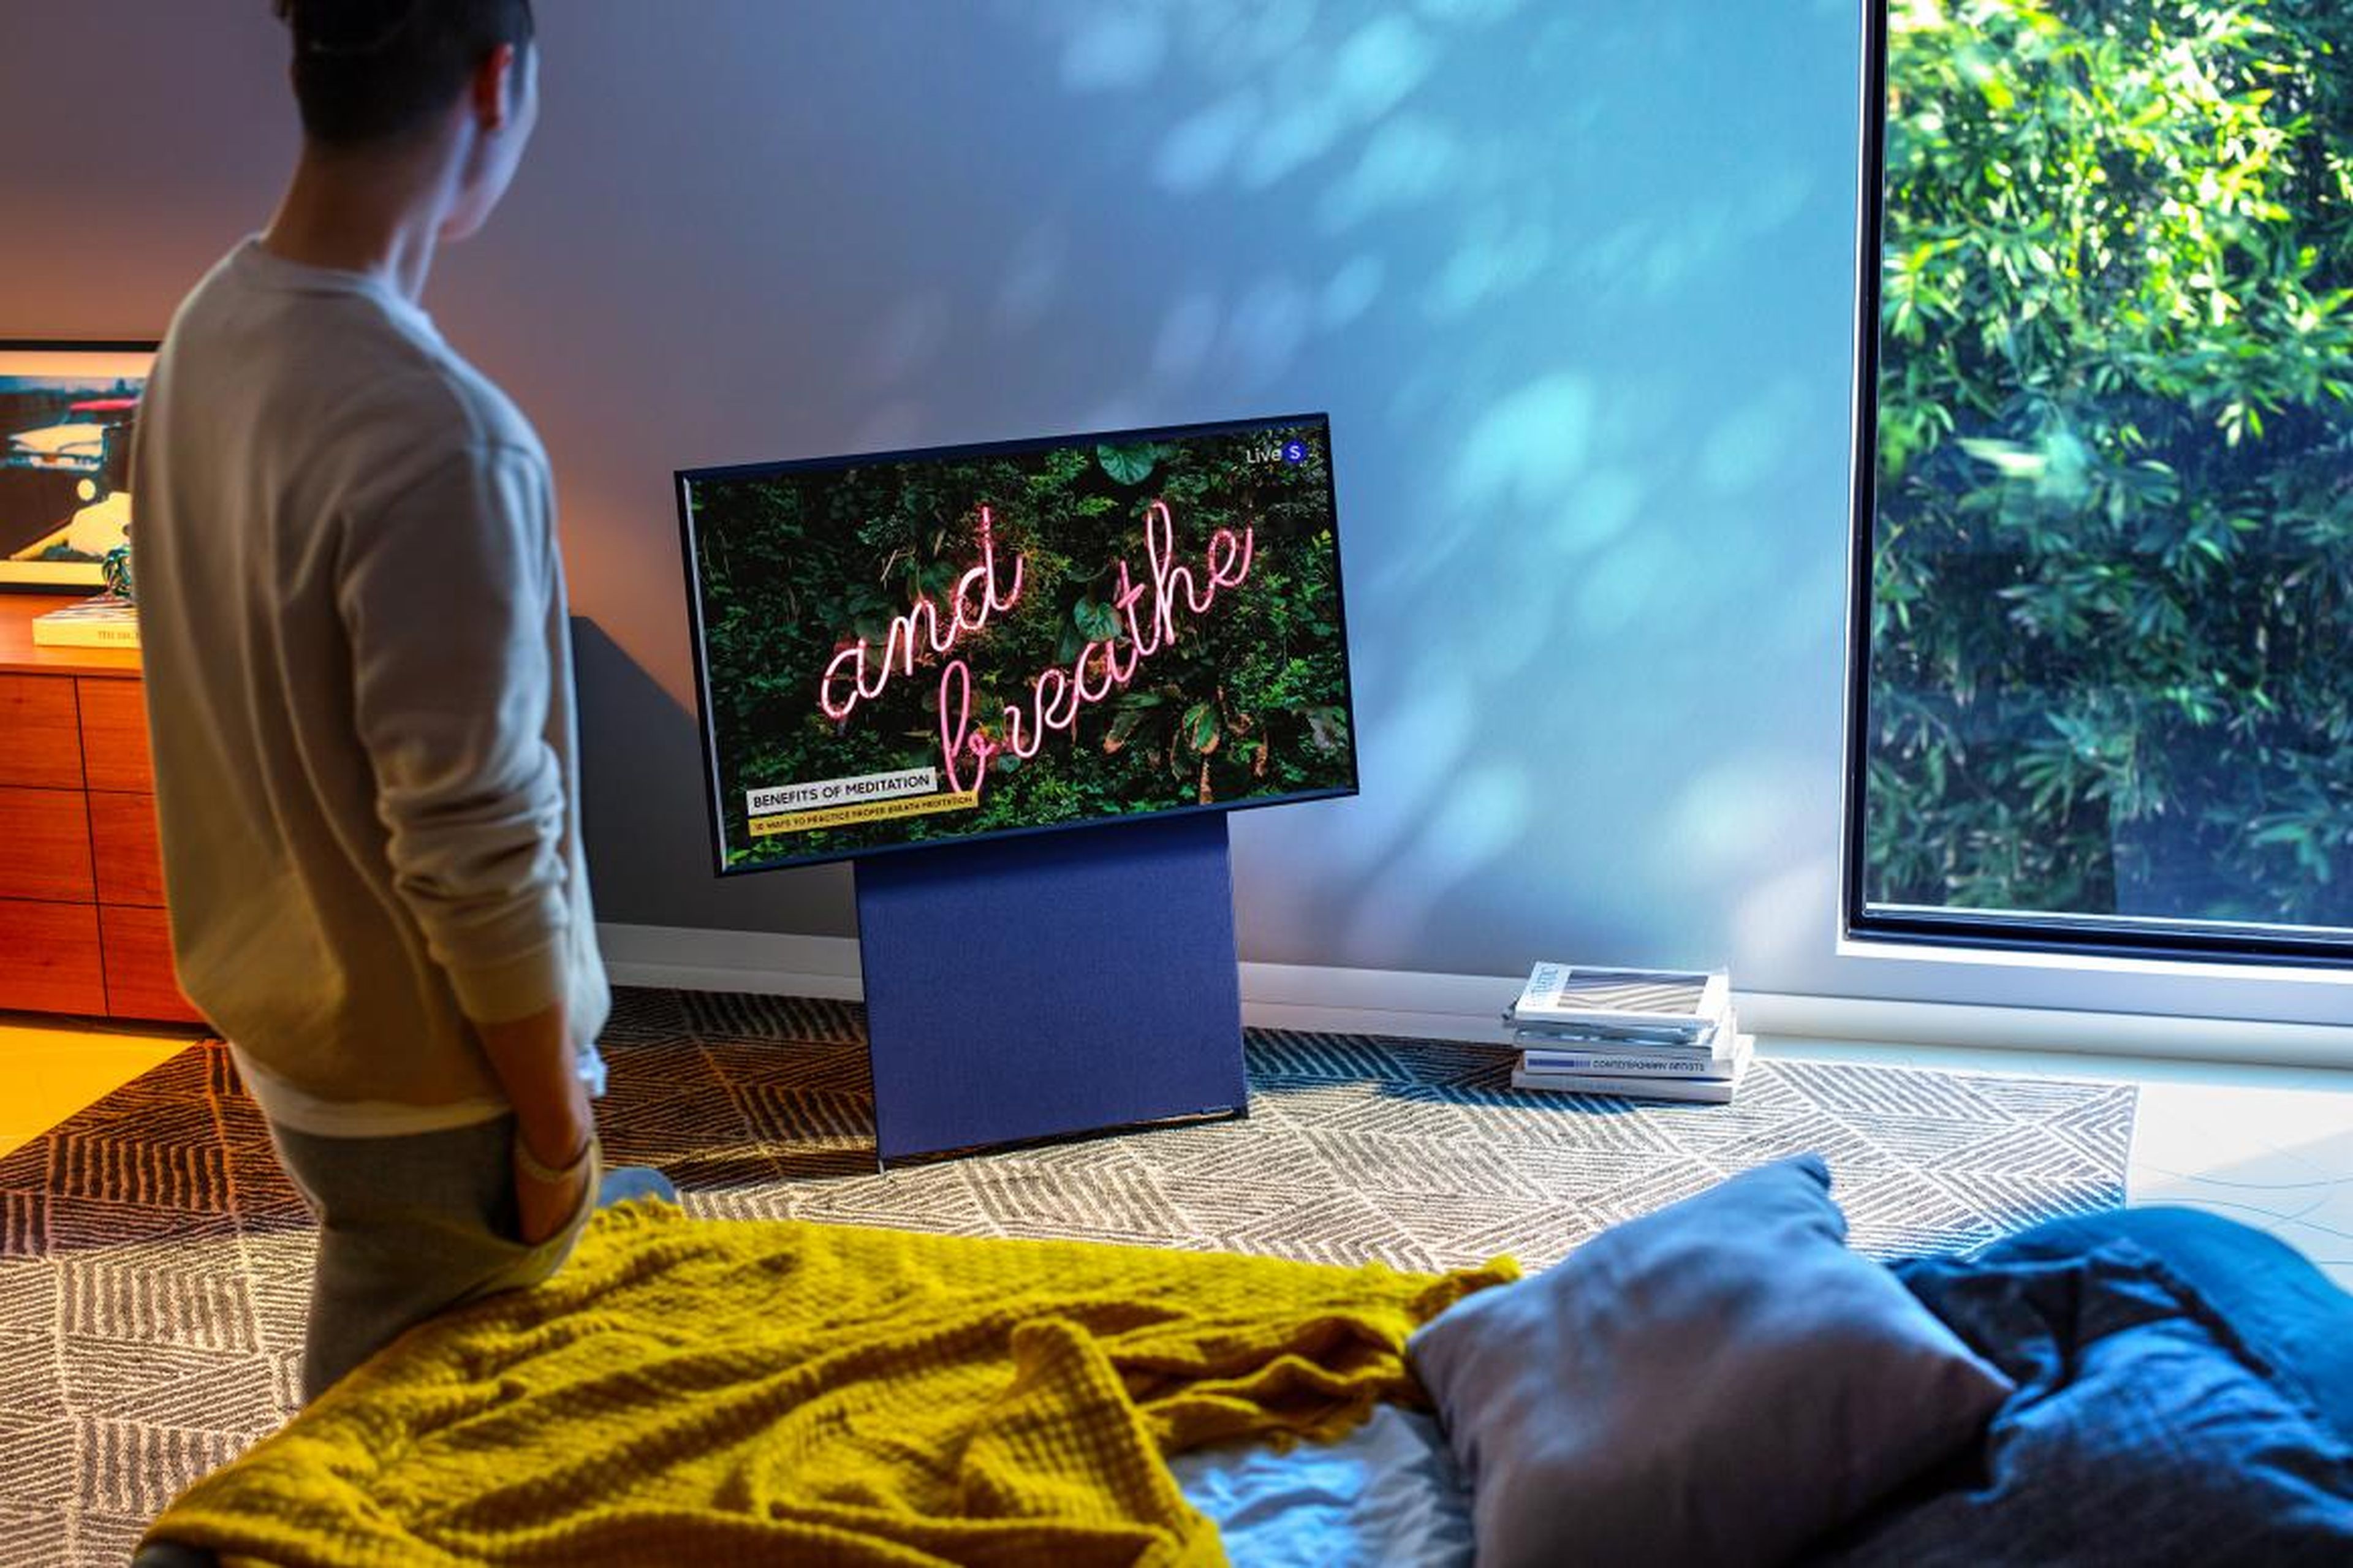 Samsung just revealed a new rotating TV that's like a giant smartphone for your living room